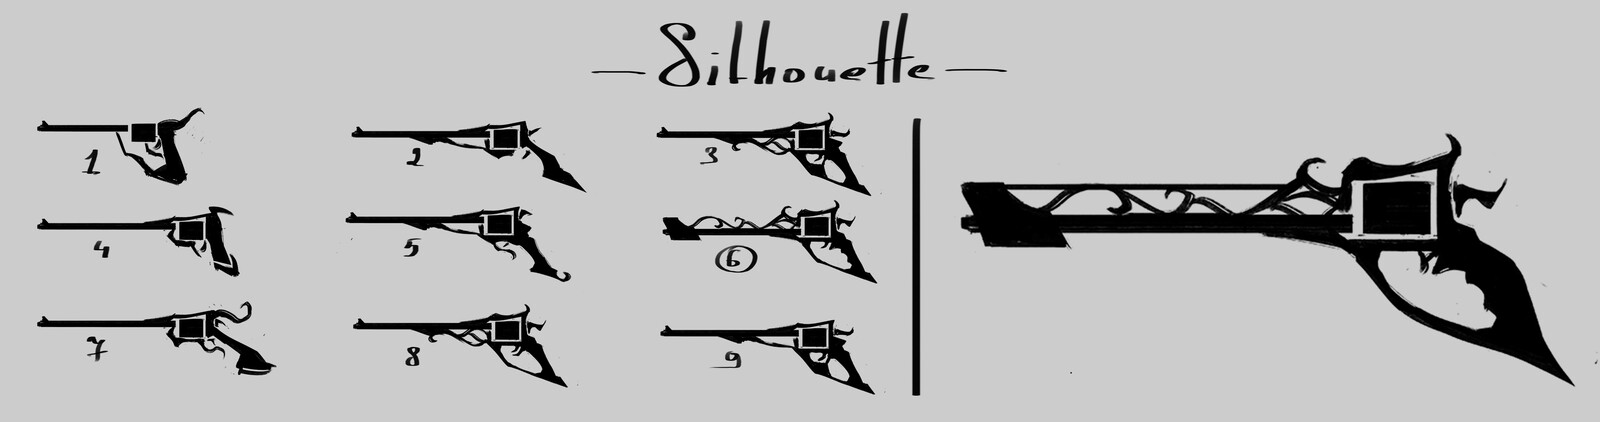 initial silhouette thumbnails